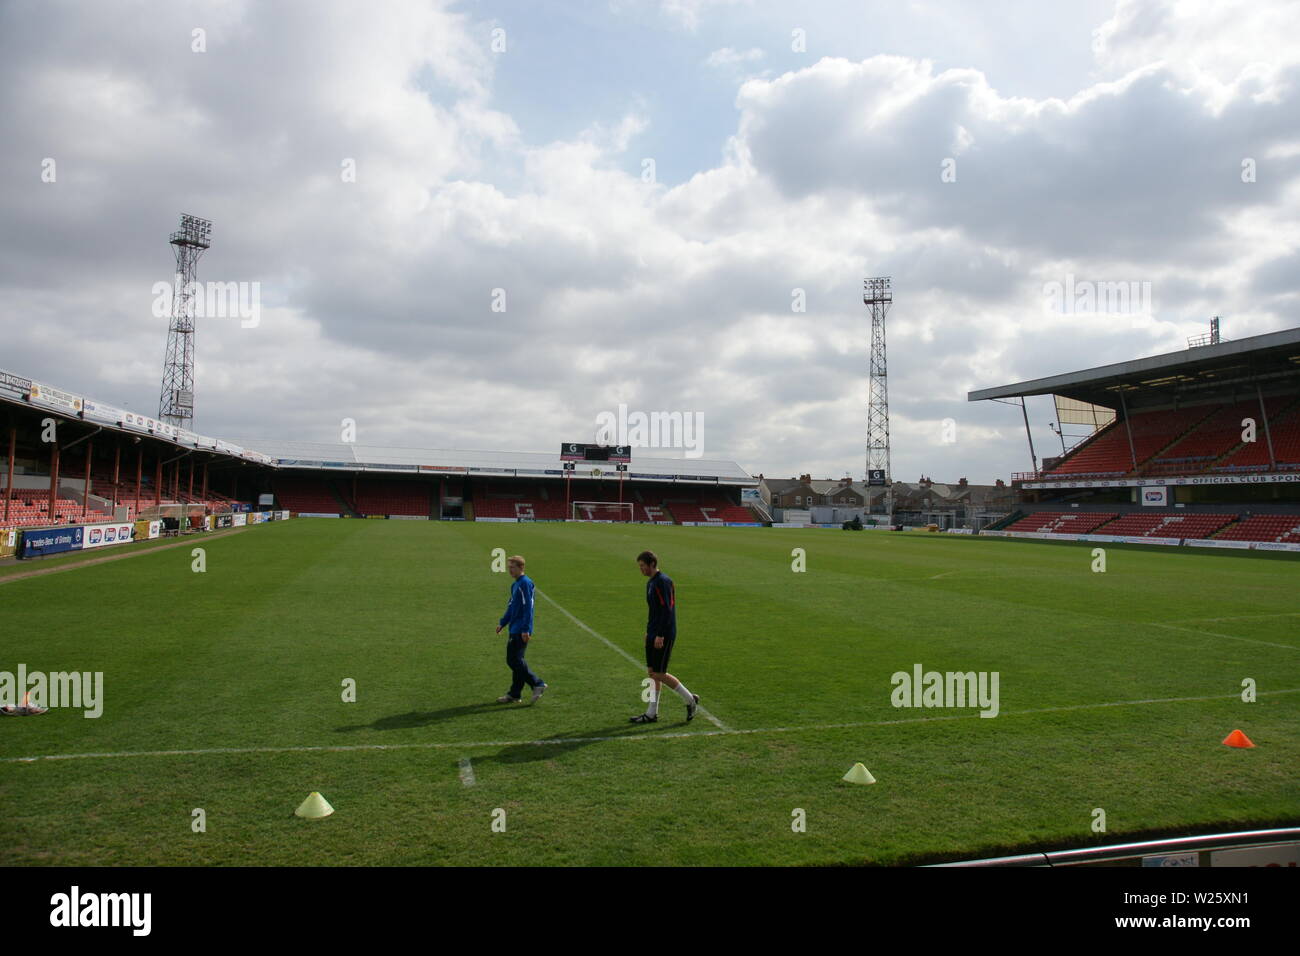 grimsby town football club Stock Photo